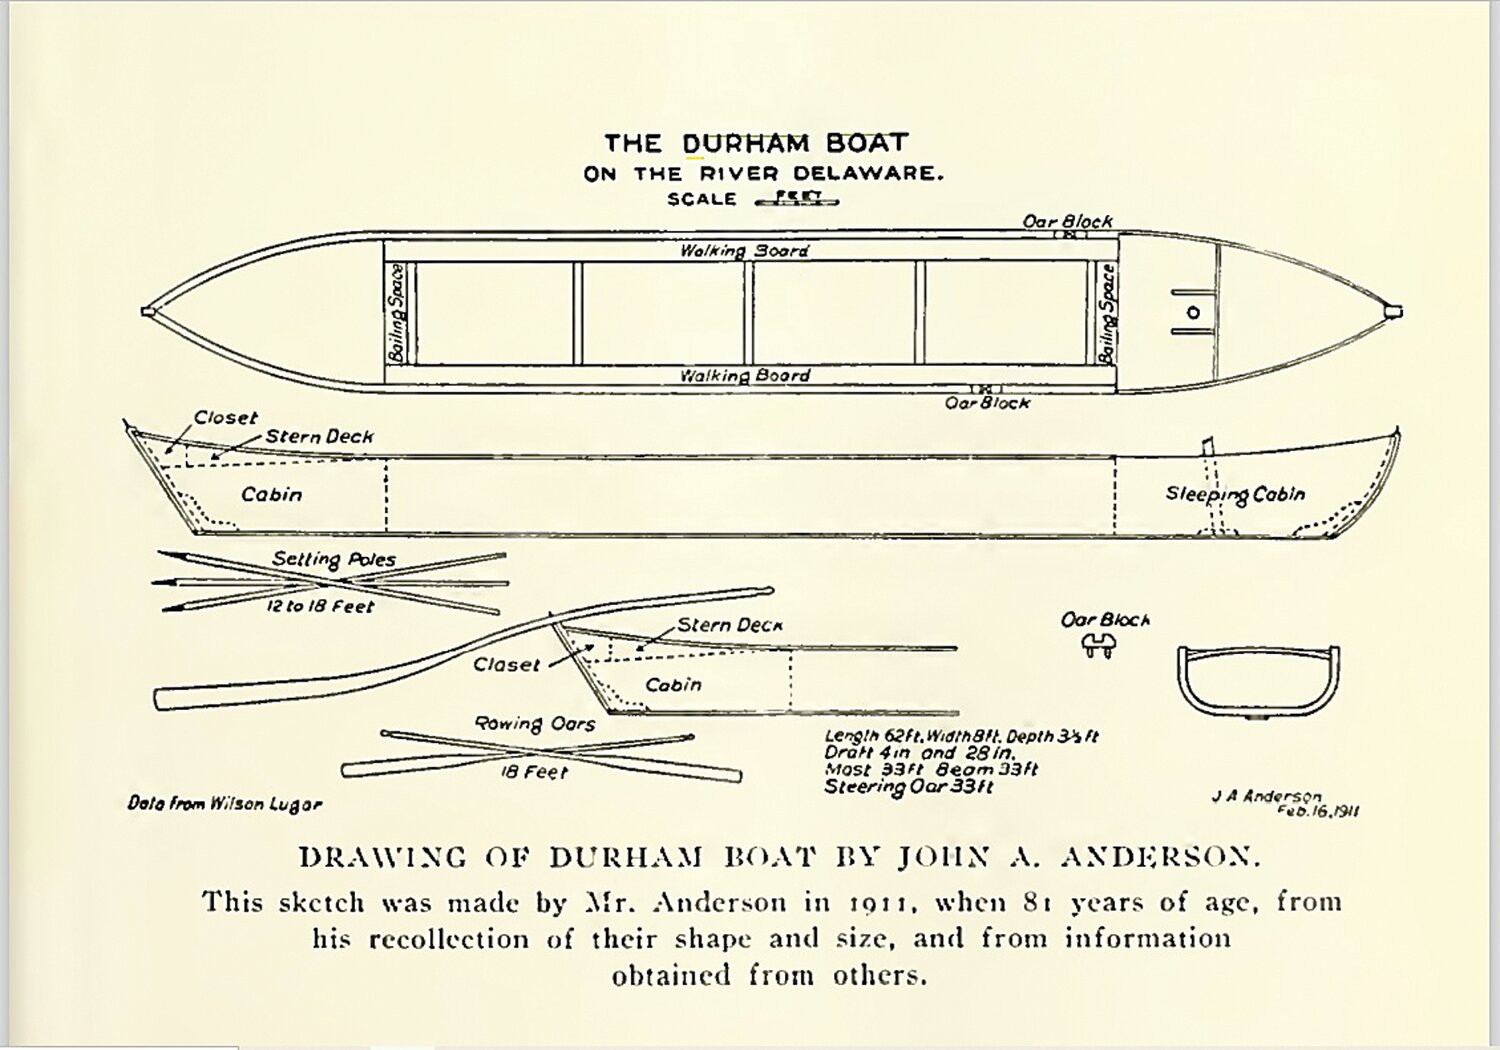 1911 drawing of a Durham boat by John A. Anderson.